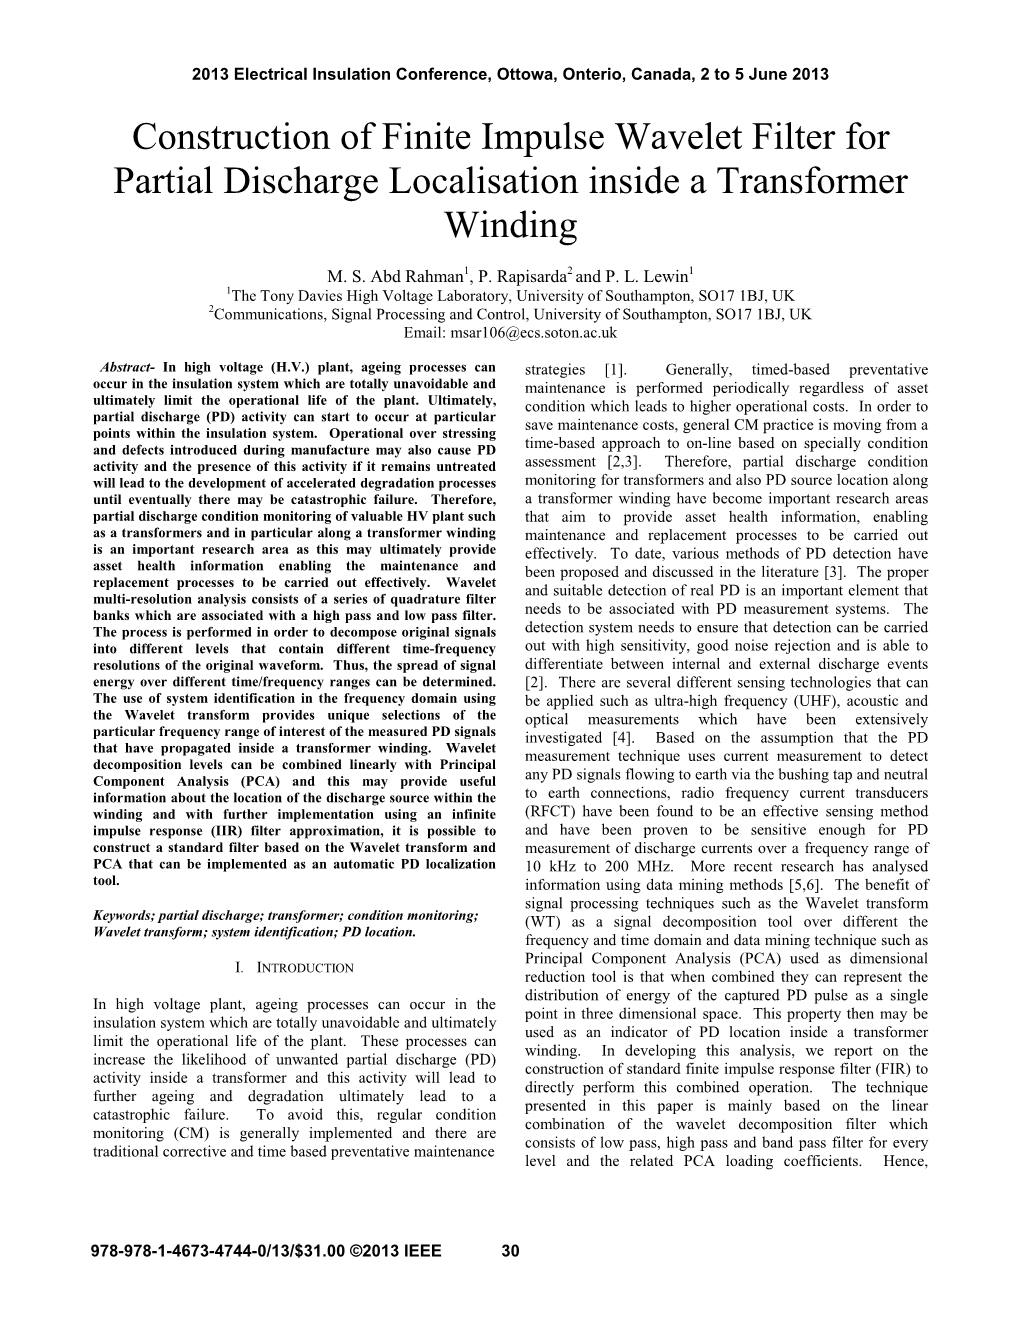 Construction of Finite Impulse Wavelet Filter for Partial Discharge Localisation Inside a Transformer Winding